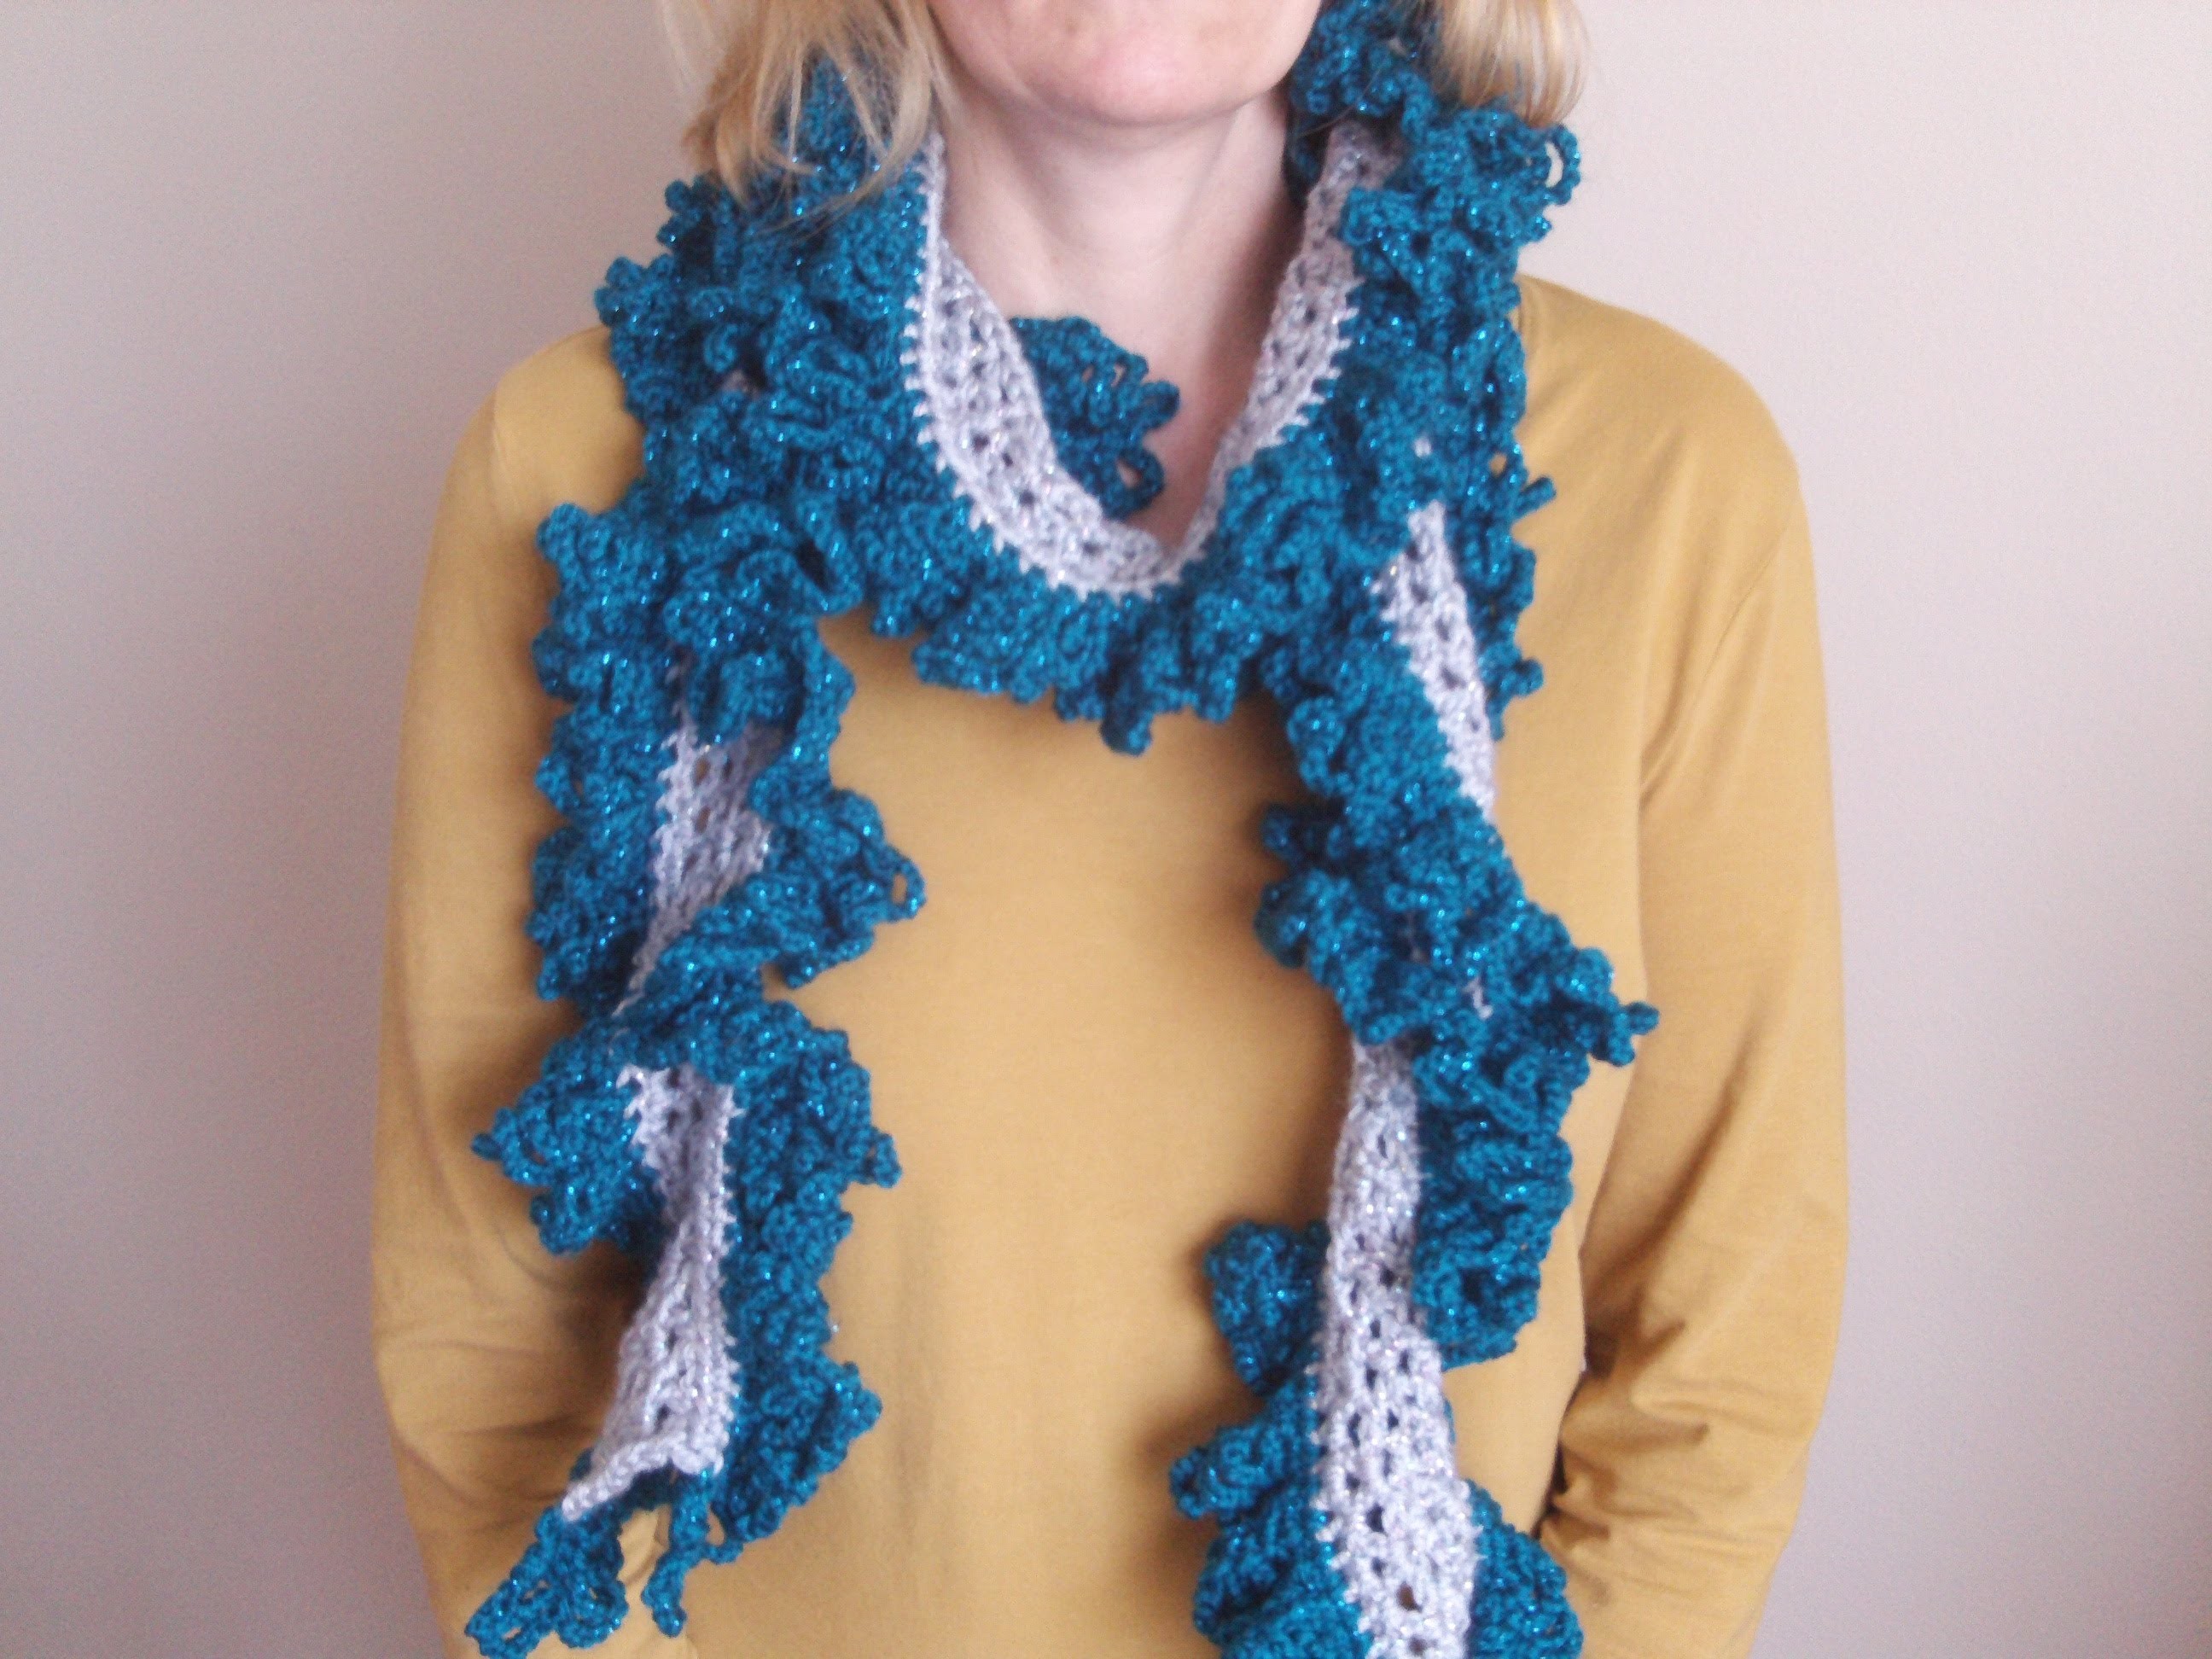 How to Crochet a Ruffle Scarf